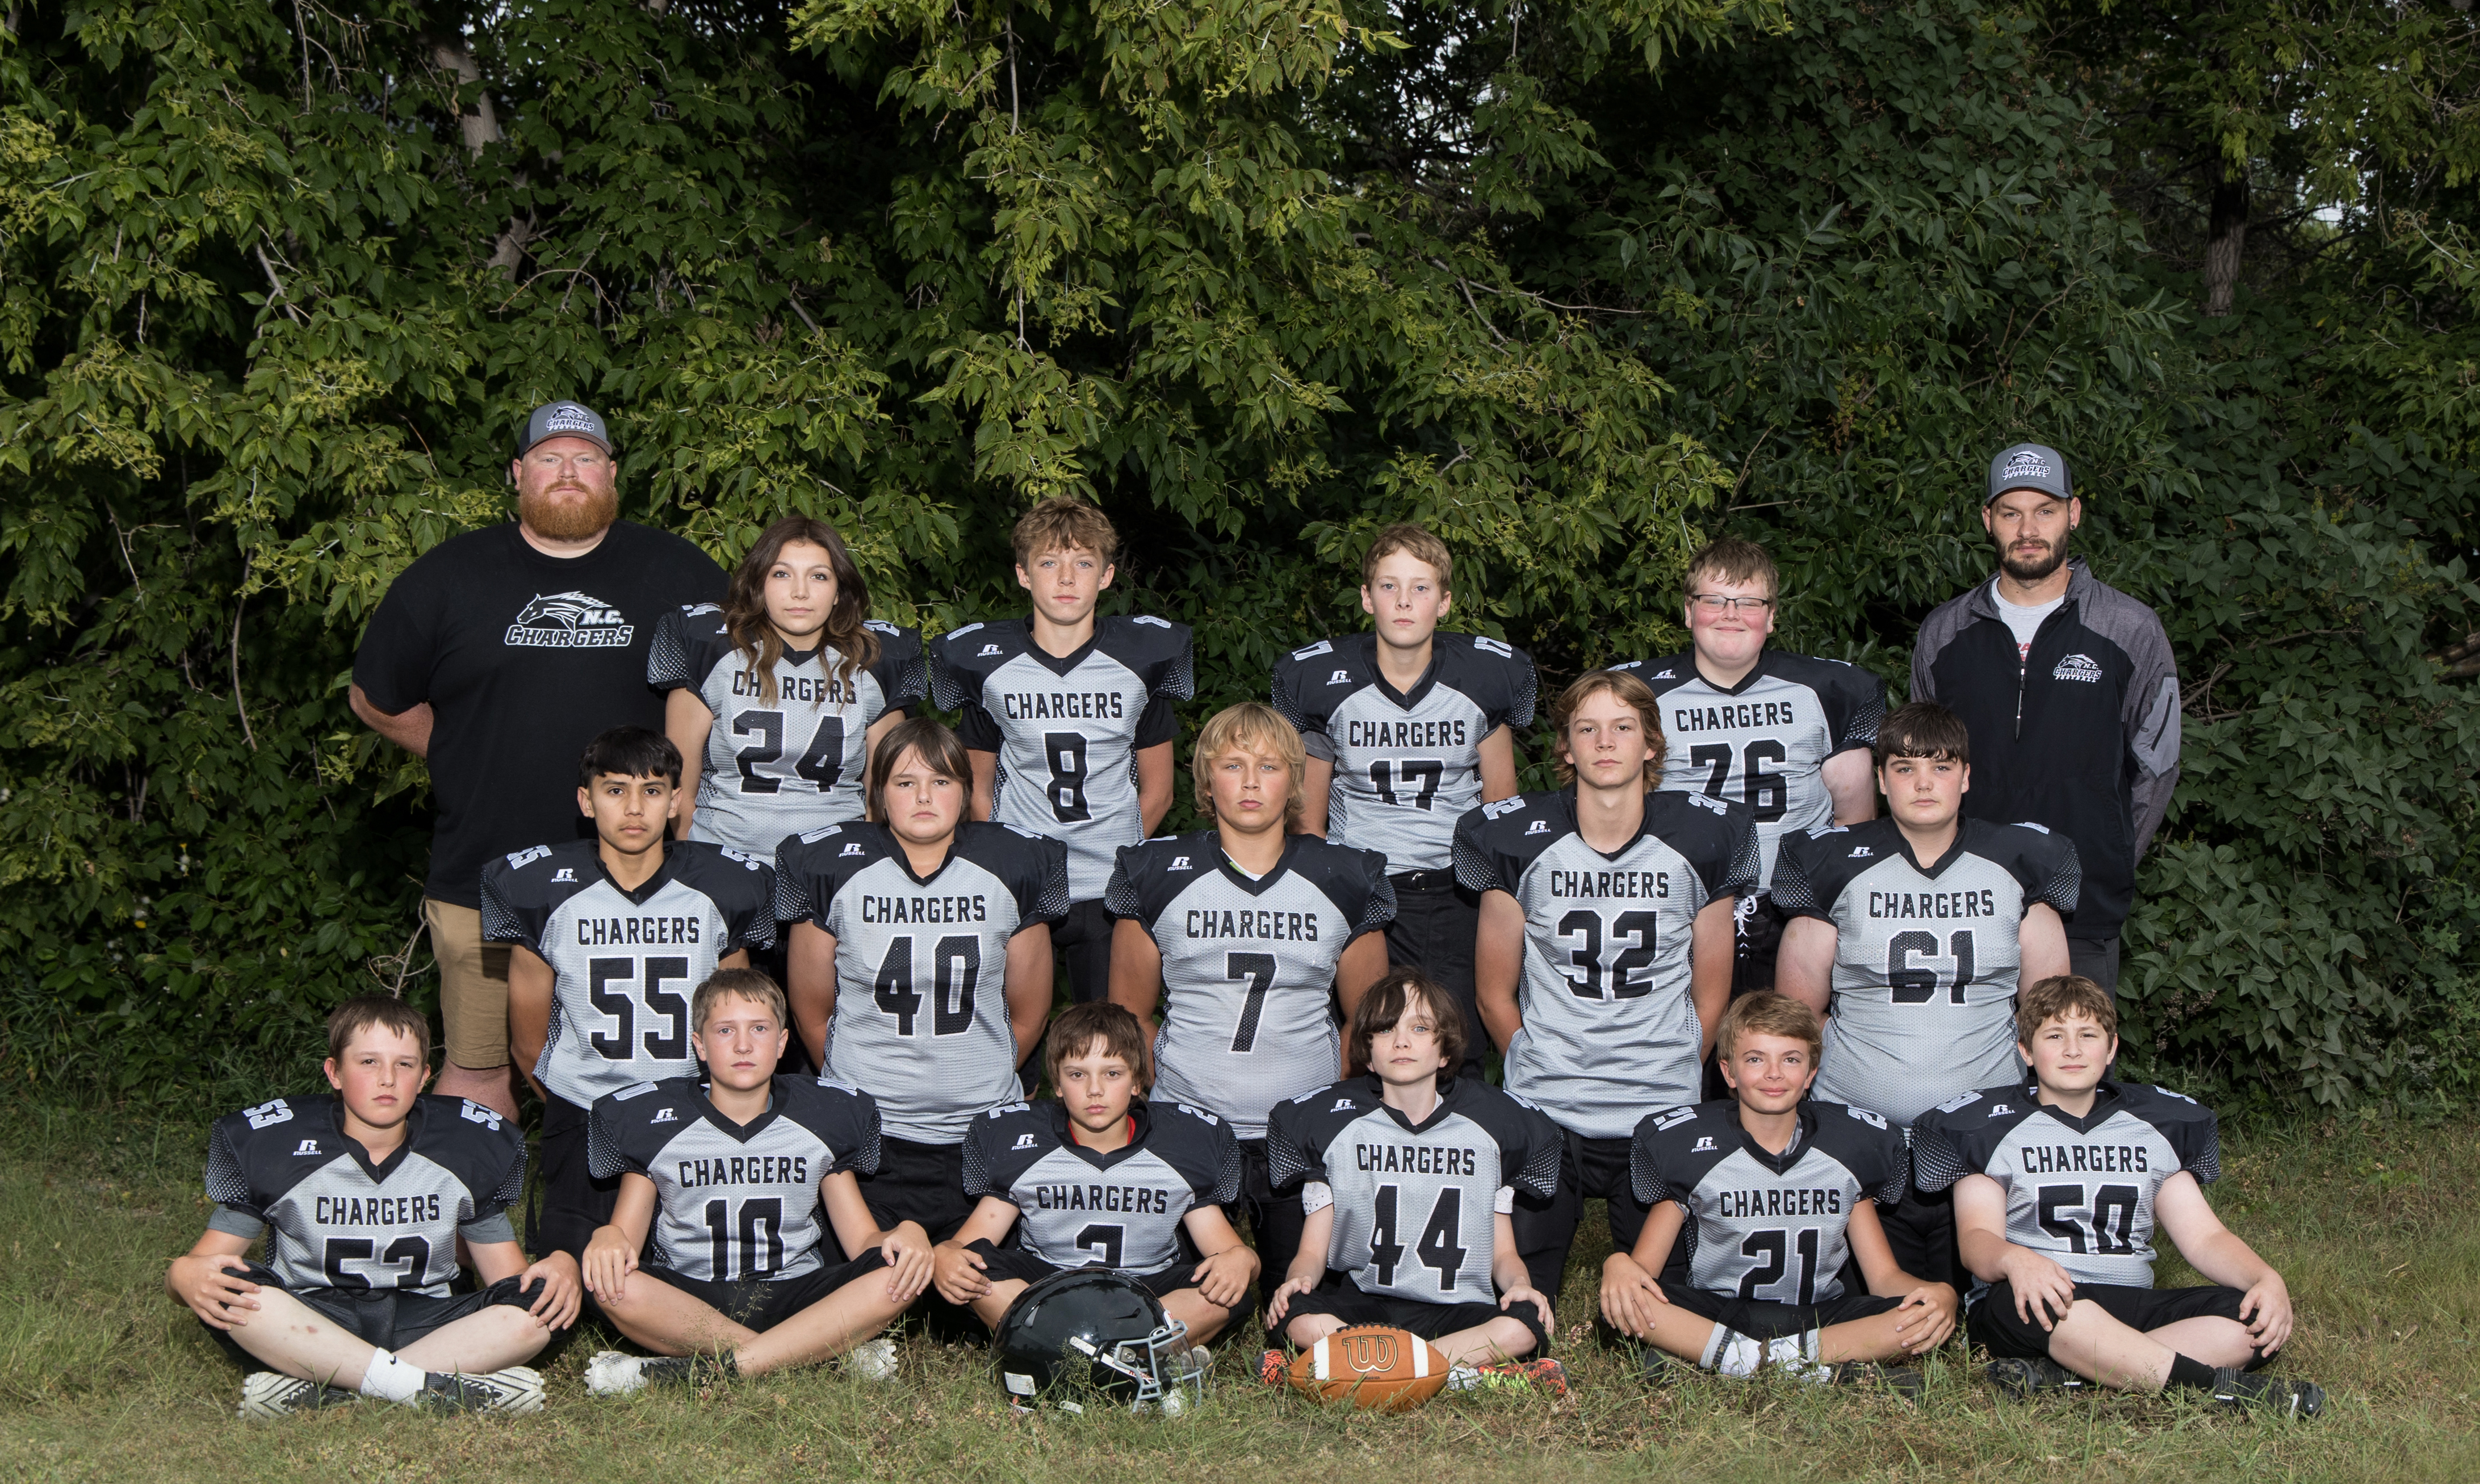 Chargers Football team